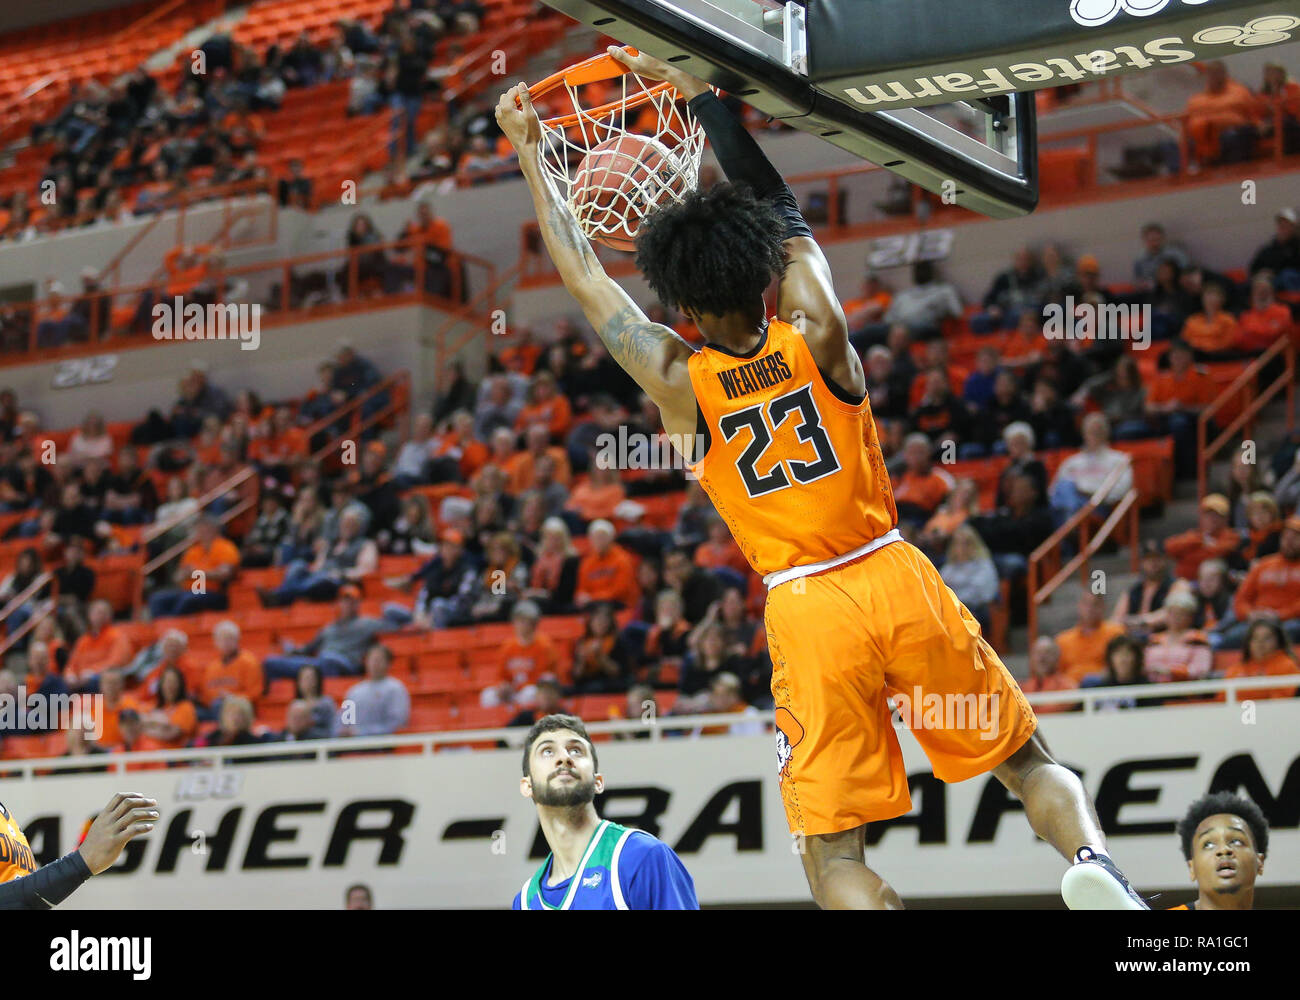 Stillwater, USA. 29th Dec, 2018. Oklahoma State Guard Michael Weathers (23) dunks the ball during a basketball game between the Texas A&M University-Corpus Christi Islanders and Oklahoma State Cowboys at Gallagher-Iba Arena in Stillwater, OK. Gray Siegel/CSM/Alamy Live News Stock Photo